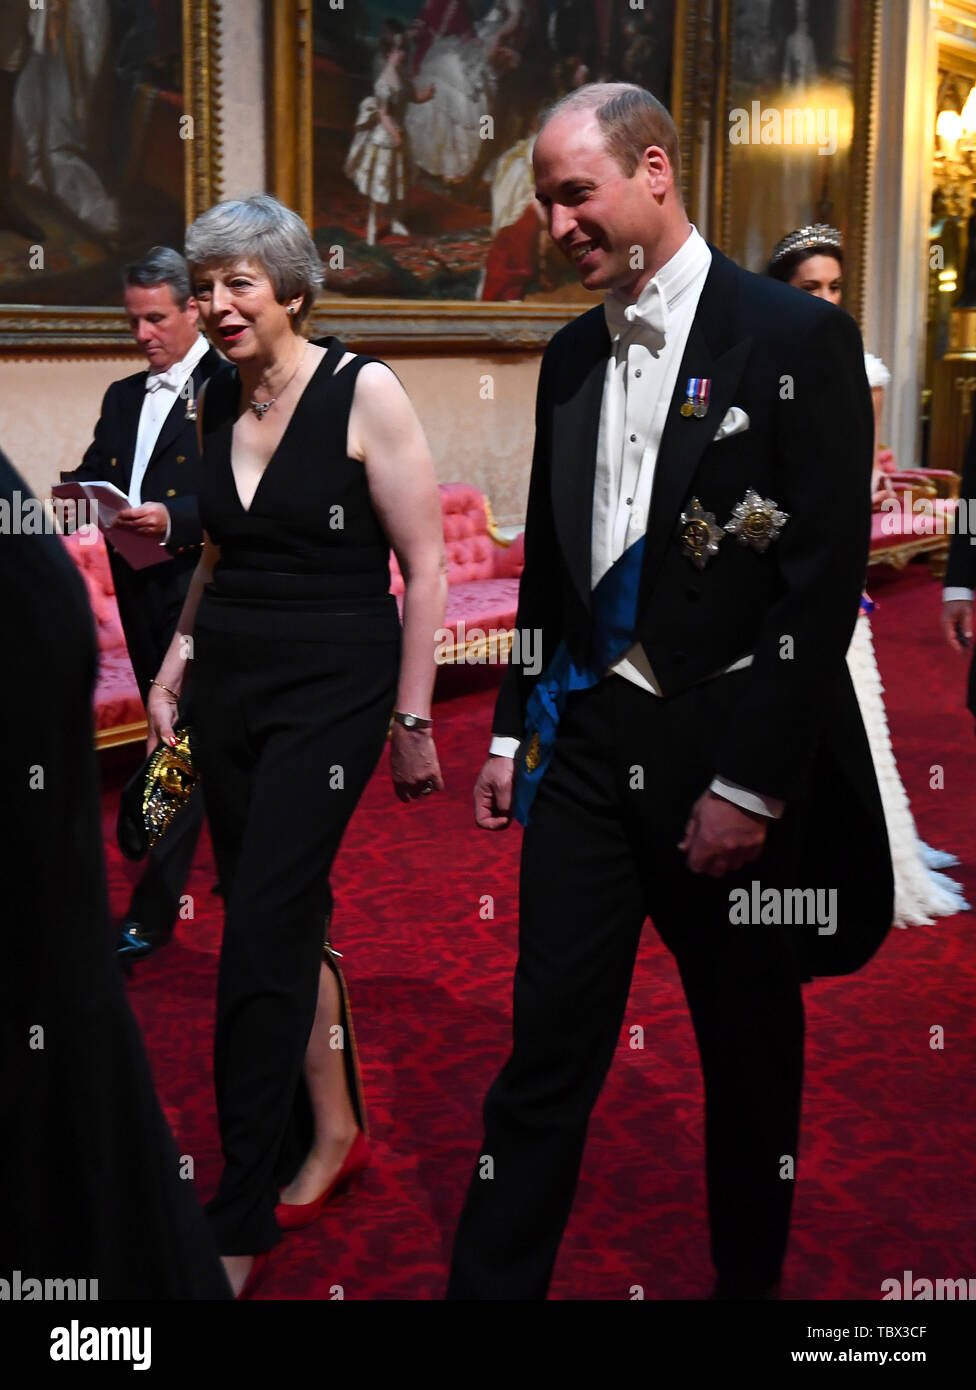 Prime Minister Theresa May and the Duke of Cambridge arrive through the East Gallery during the State Banquet at Buckingham Palace, London, on day one of the US President's three day state visit to the UK. Stock Photo